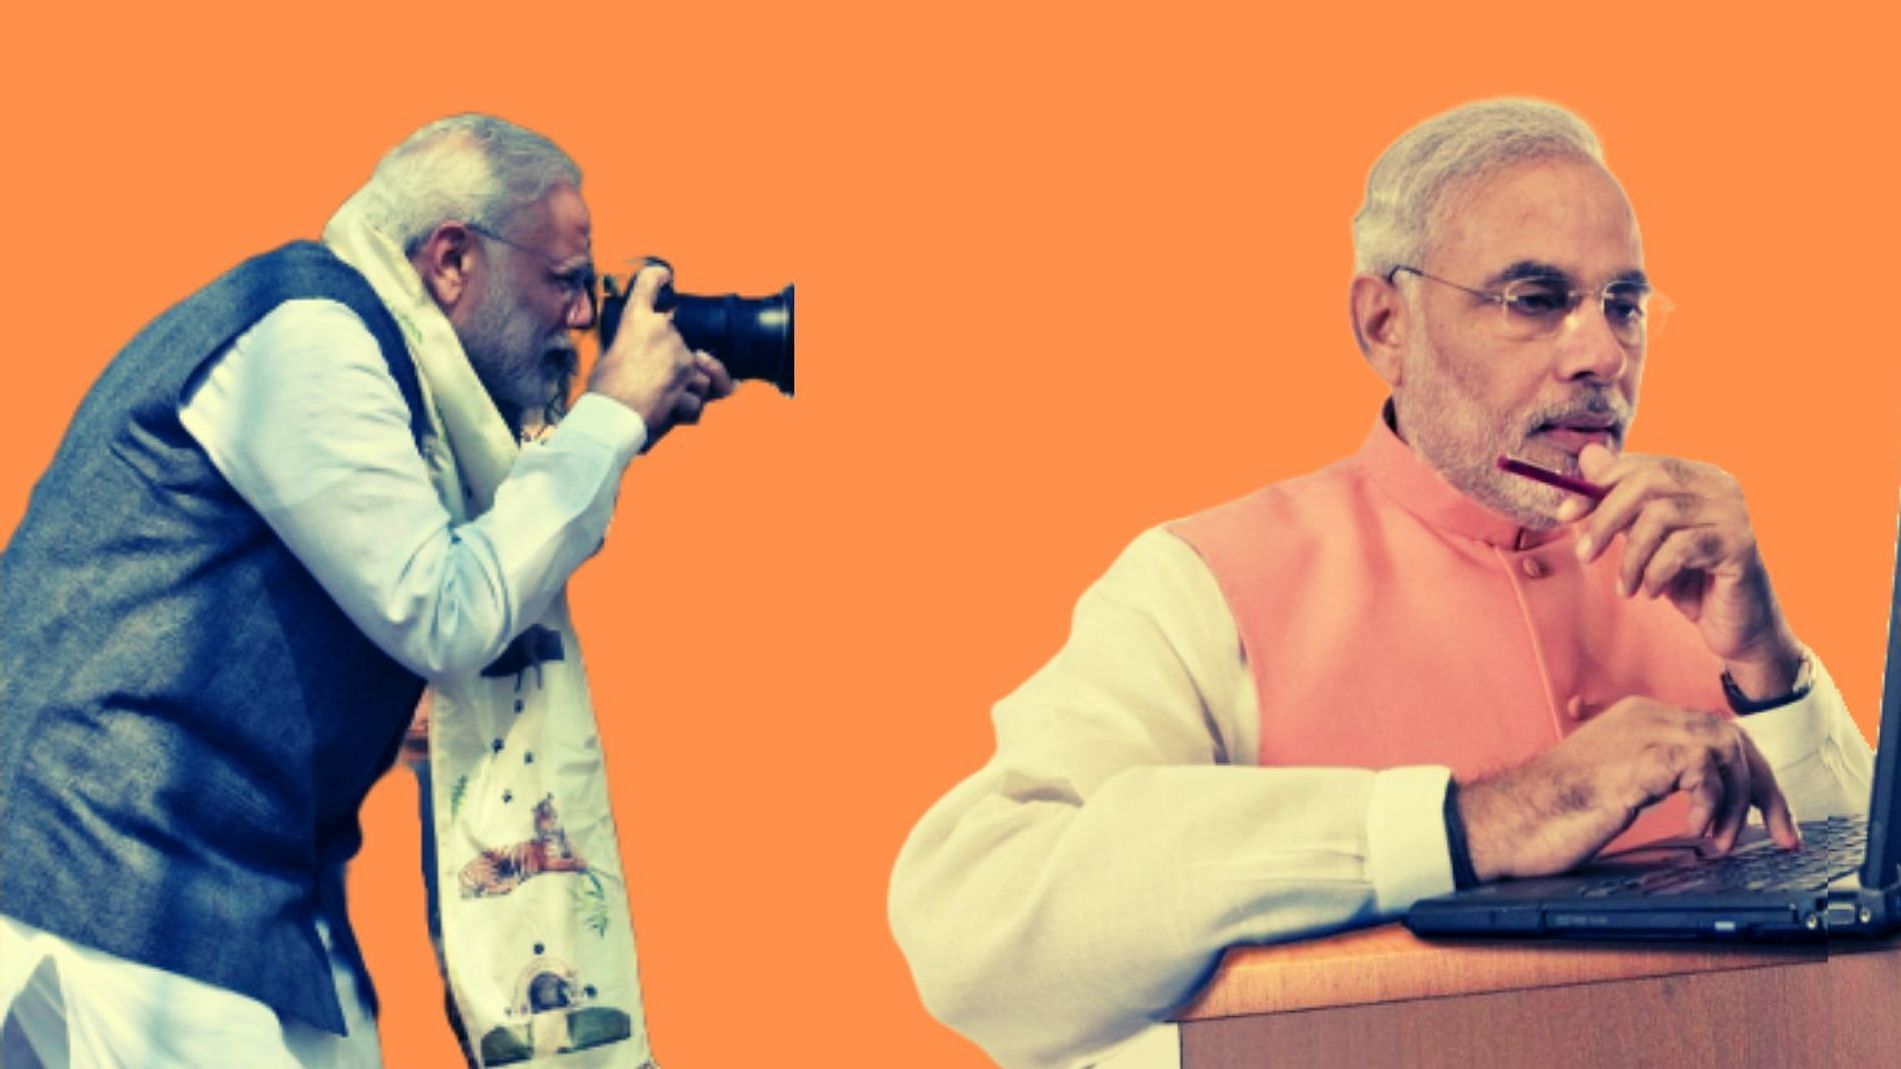 PM Modi claimed that he was one of the early adopters of email, and had used a digital camera as far back as 1988.